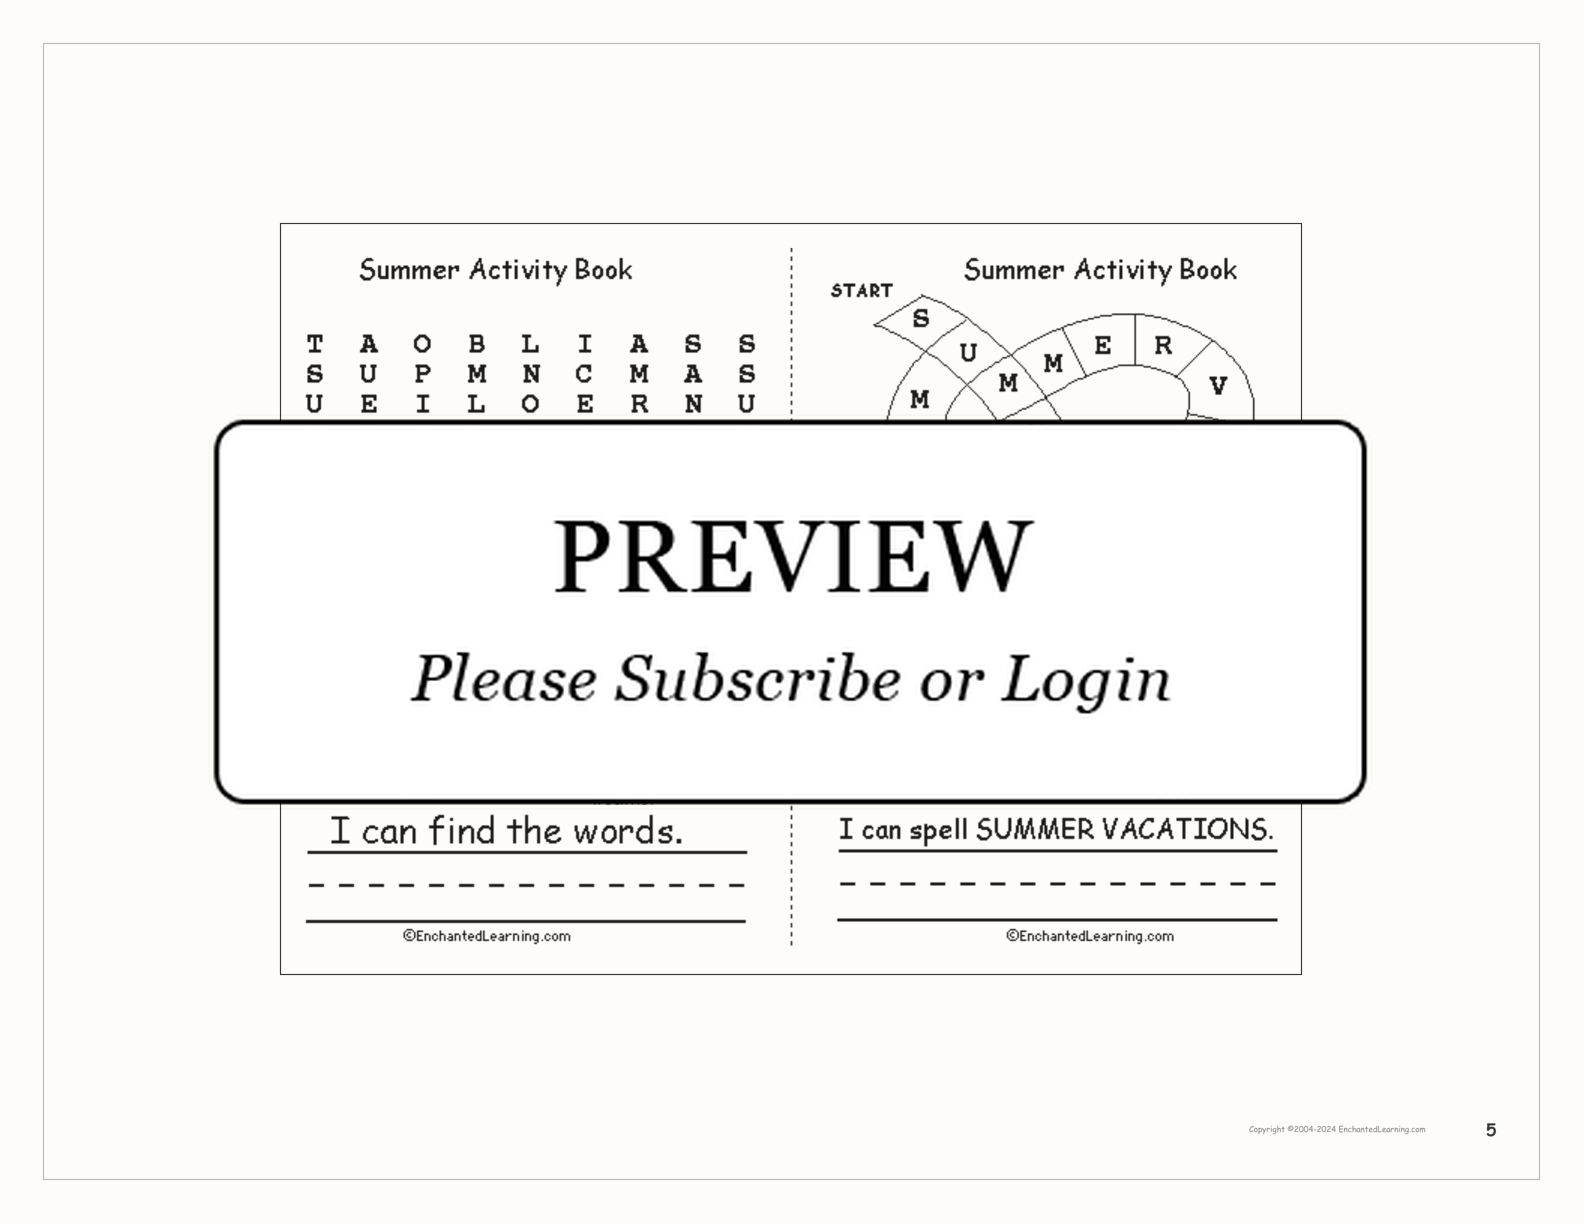 Summer Activity Book interactive worksheet page 5